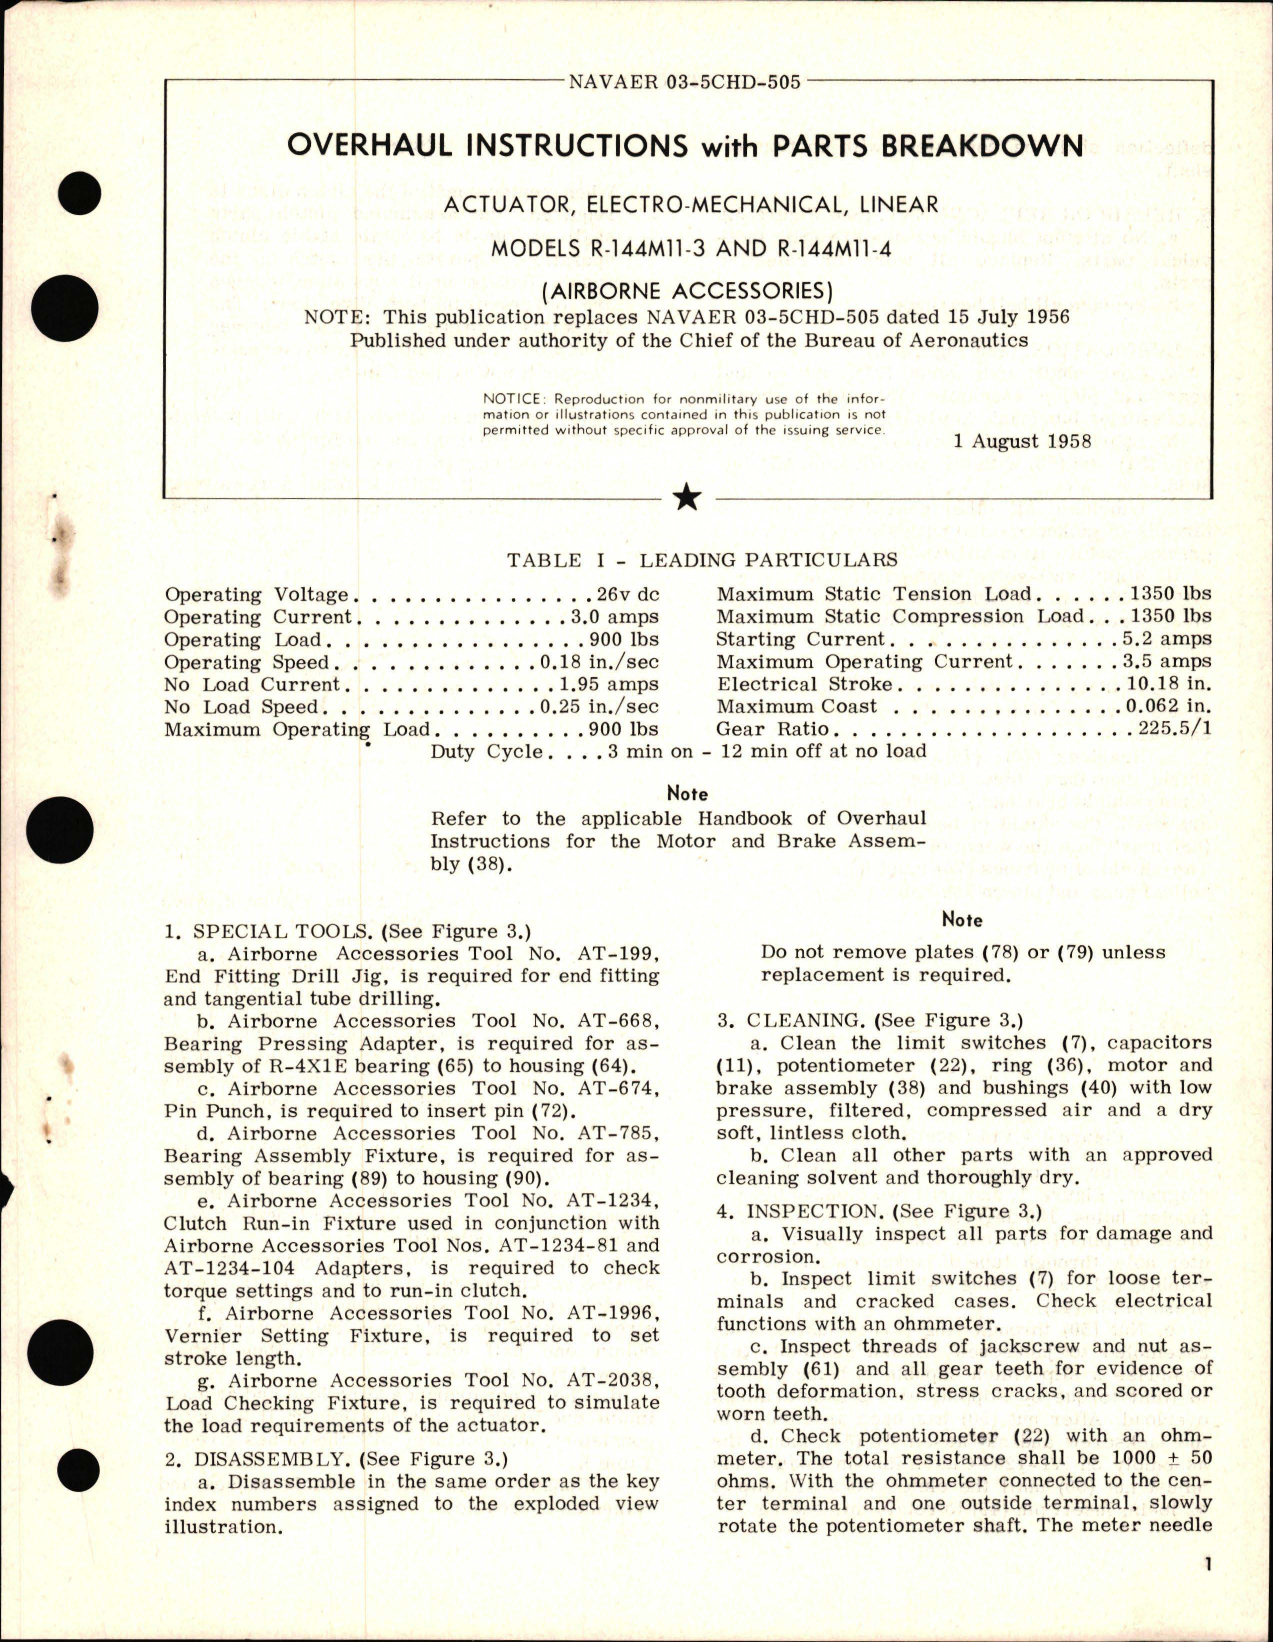 Sample page 1 from AirCorps Library document: Overhaul Instructions with Parts Breakdown for Actuator, Electro-Mechanical, Linear Models R-144M11-3 and R-144M11-4